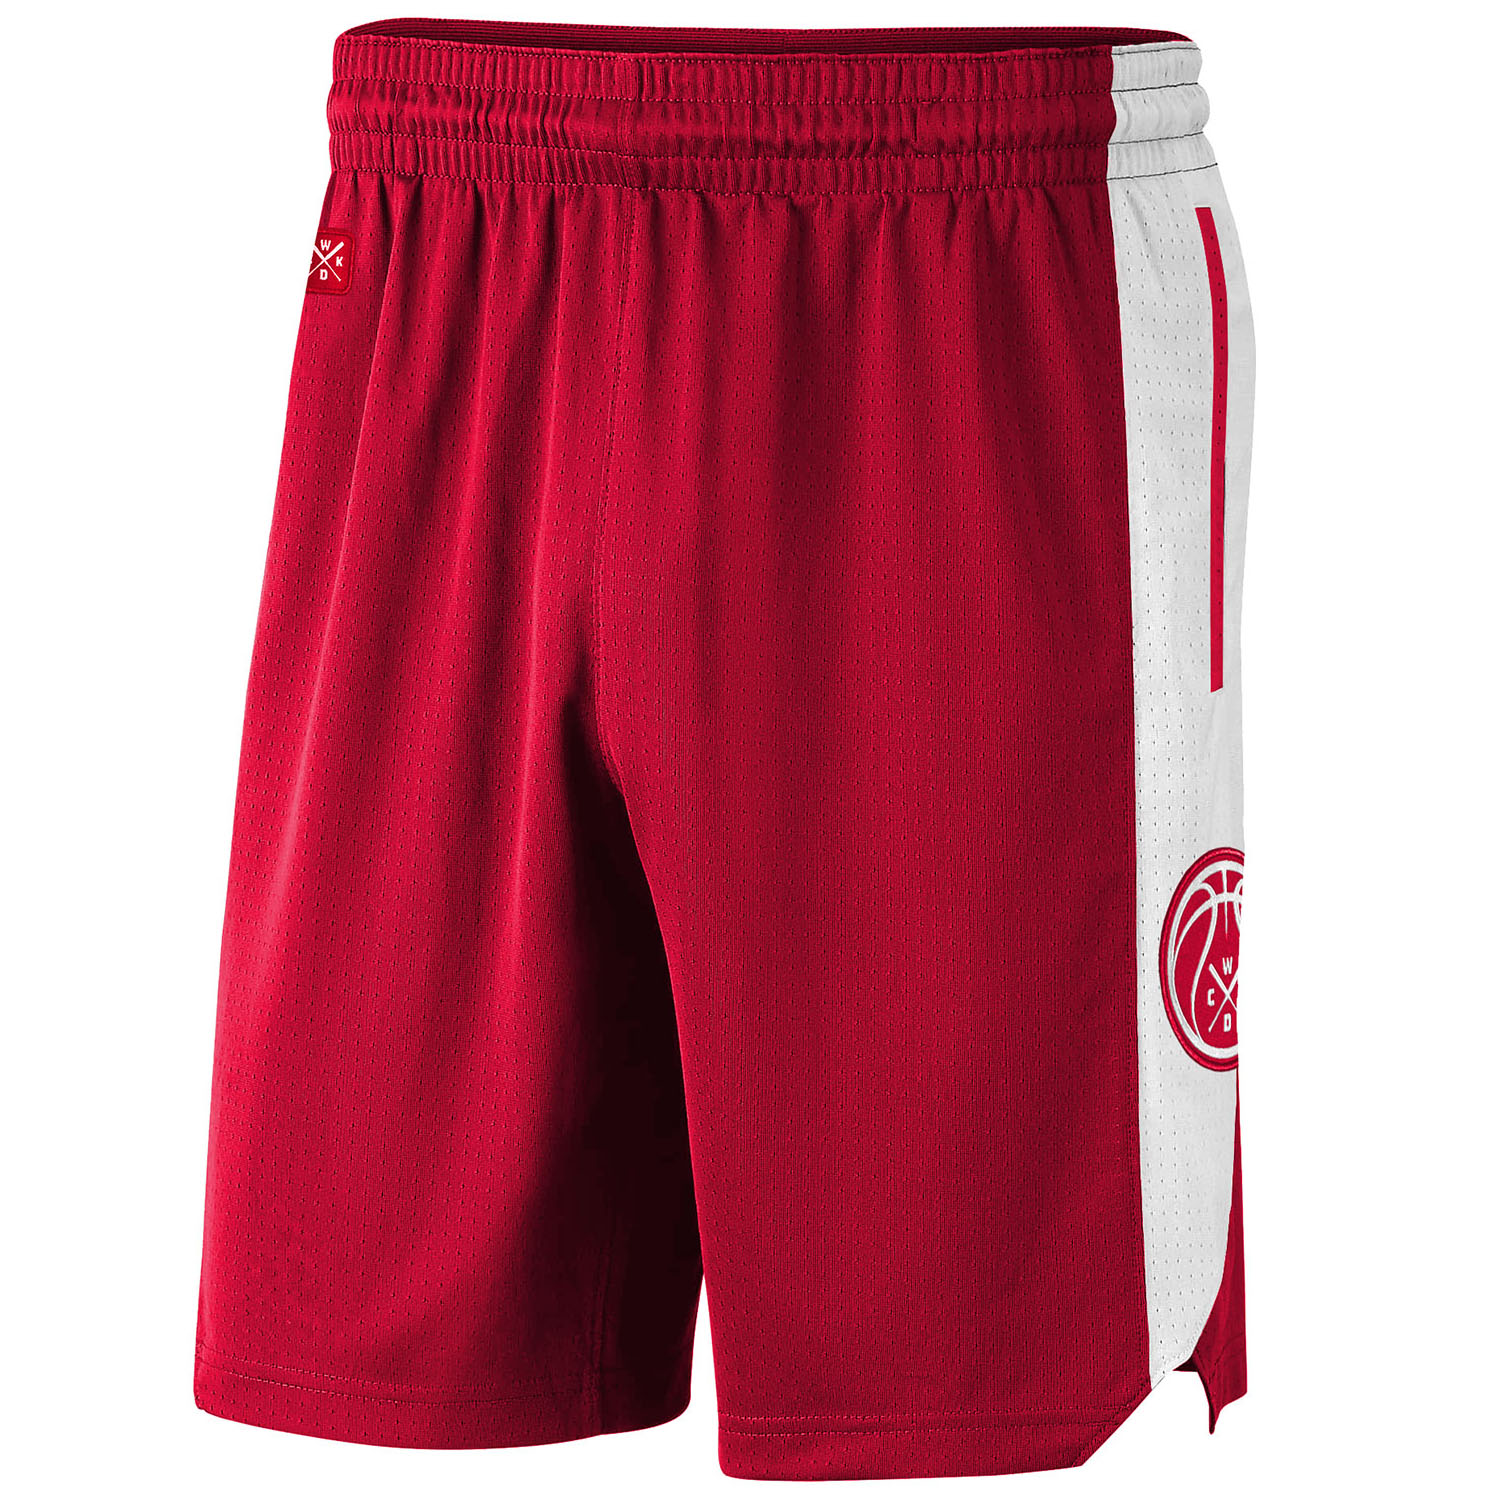 WICKED ONE Fitness Shorts, Playoffs, rot-weiß